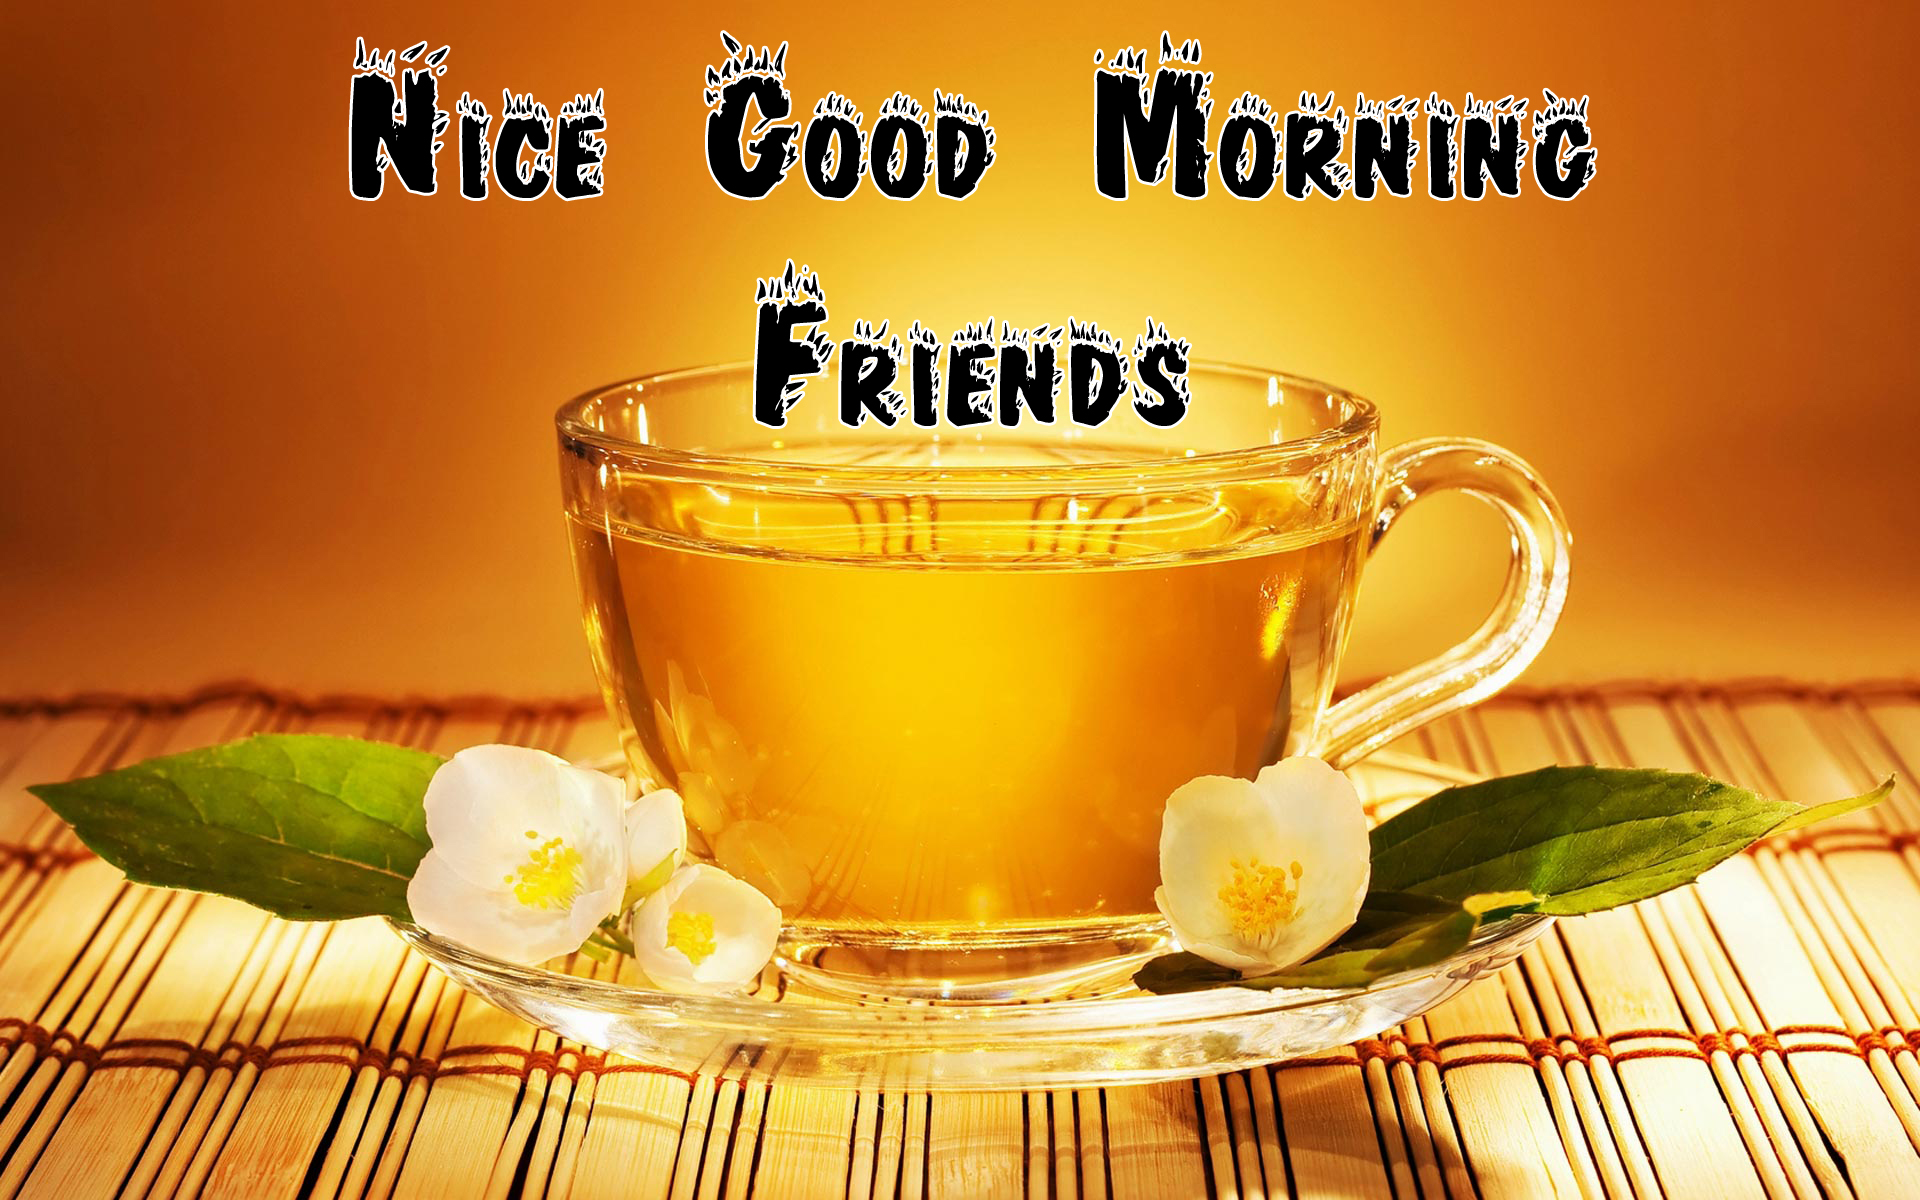 Mobile Compatible Good Morning Wallpapers, Jeanne Sayre - Friend Good  Morning Wishes - 1920x1200 Wallpaper 